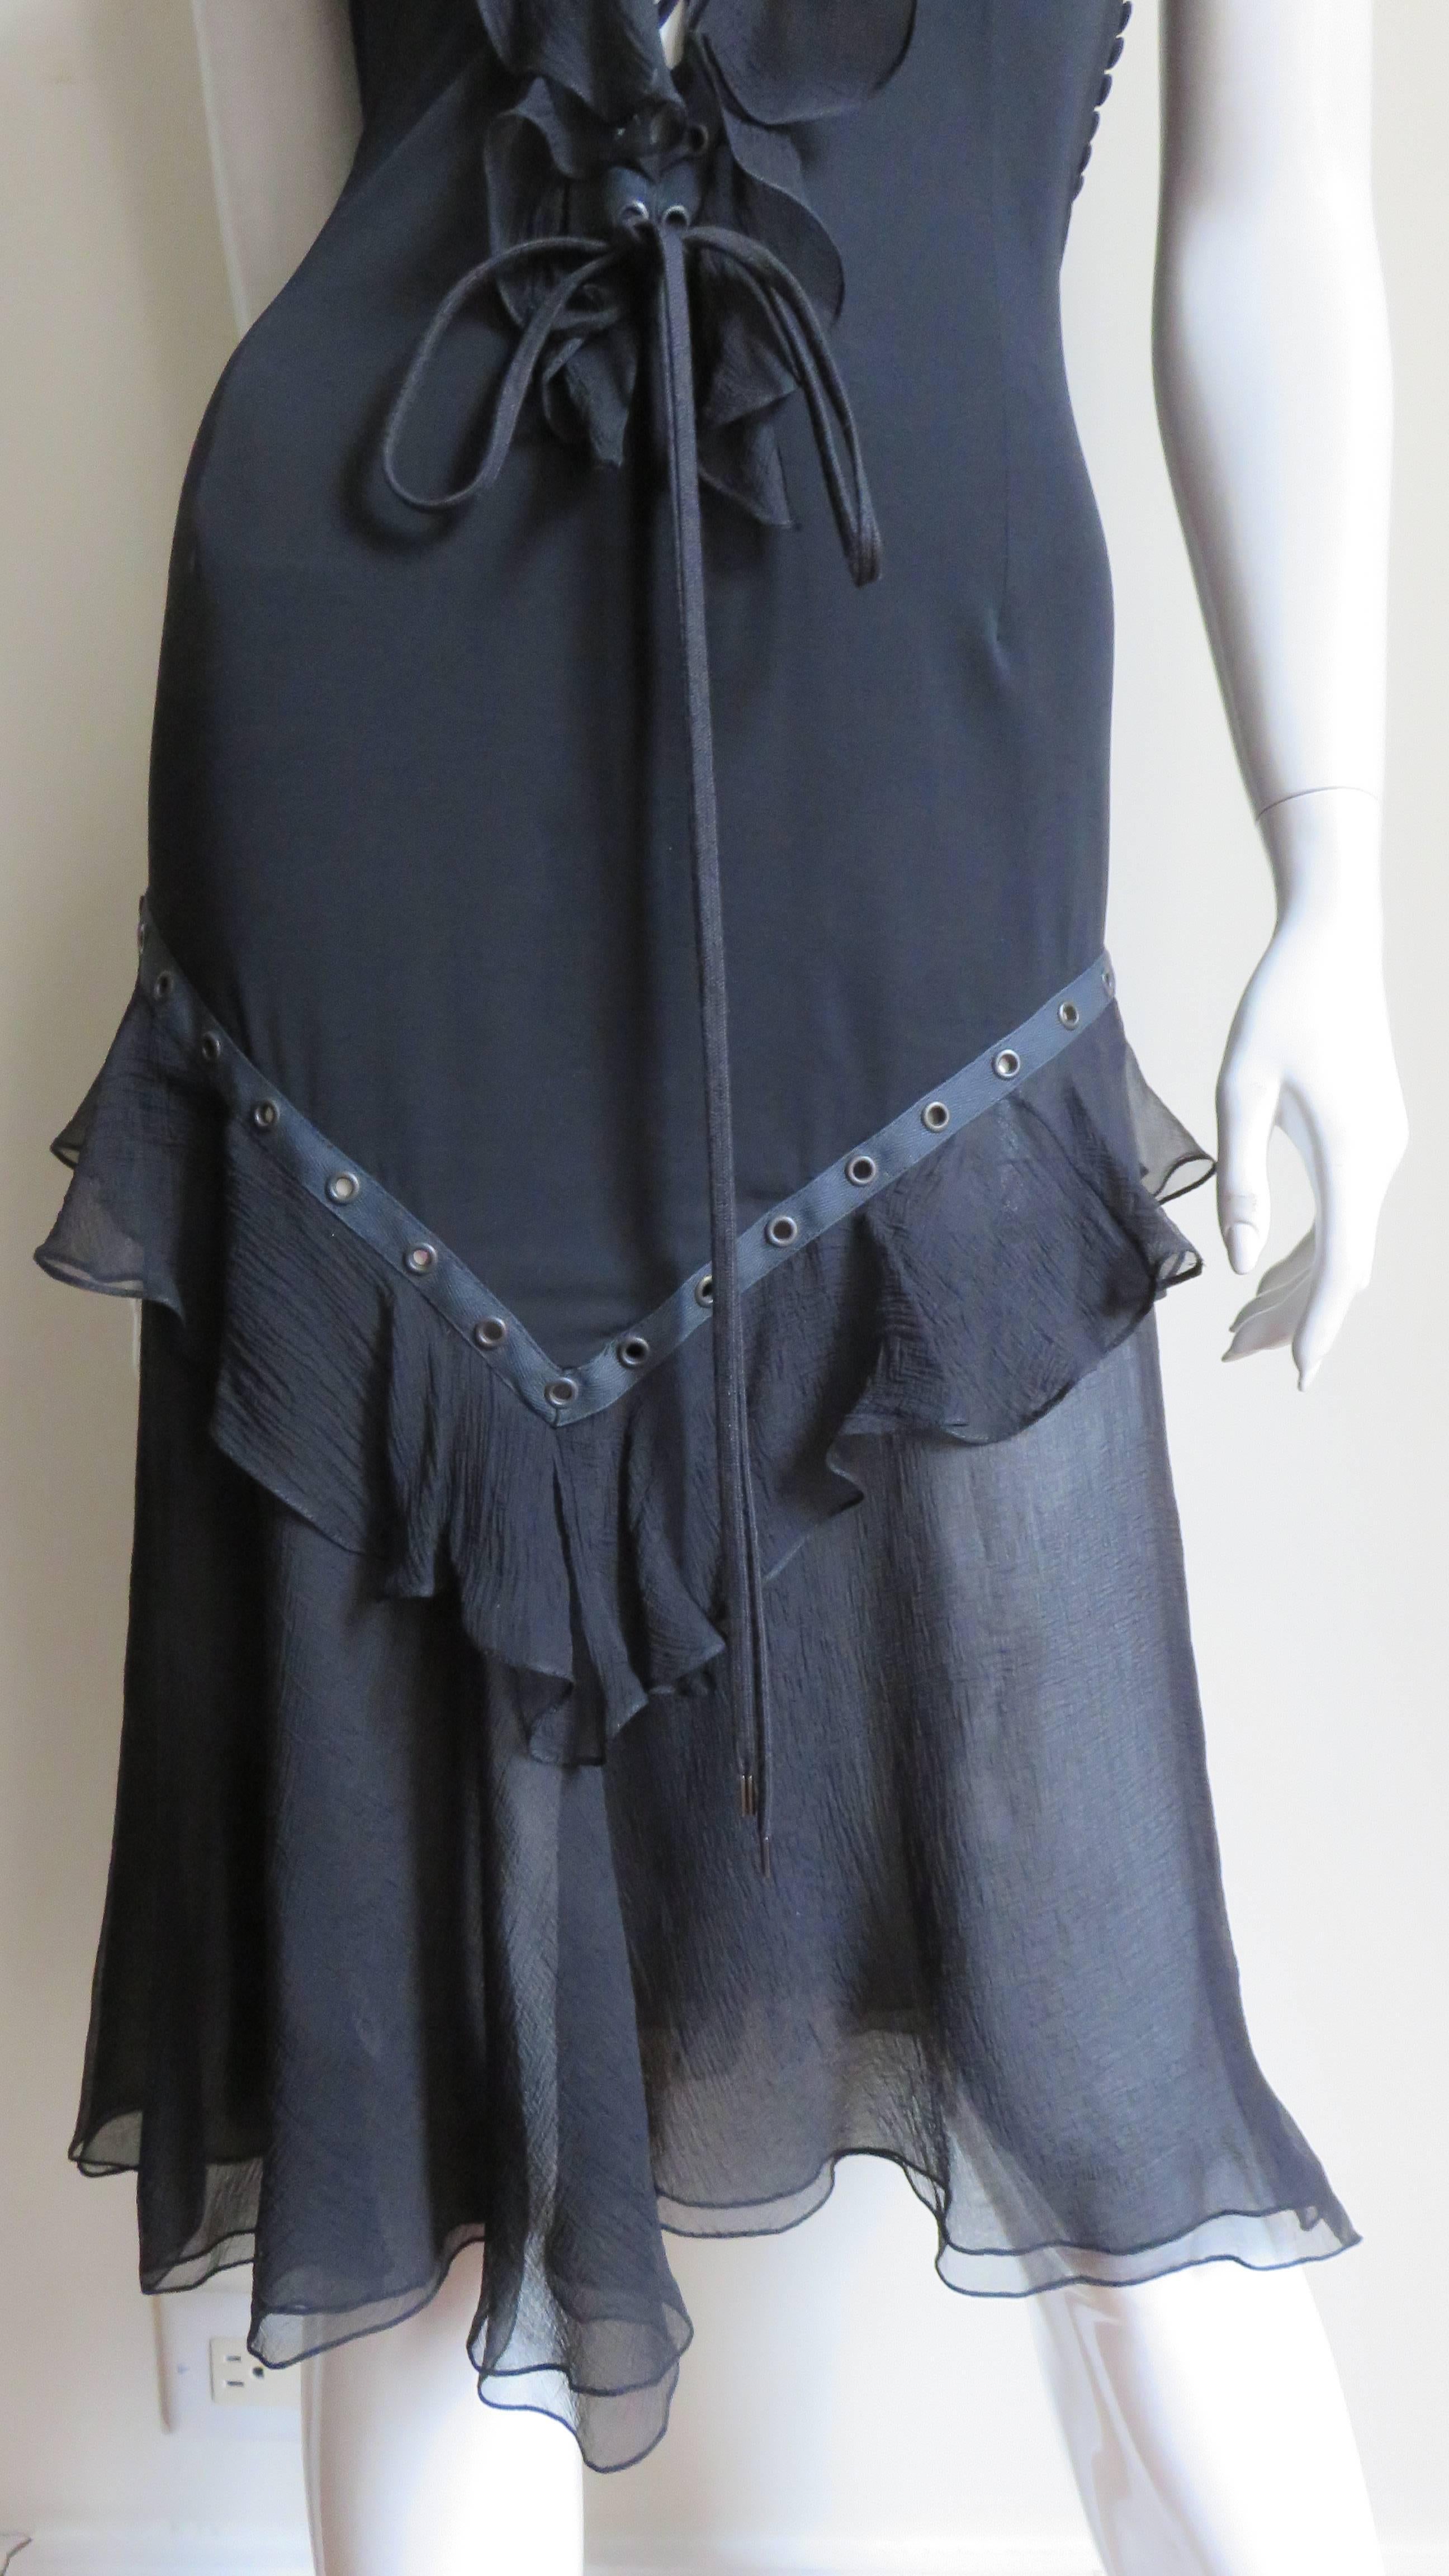 Christian Dior by John Galliano Lace Up Dress In Excellent Condition For Sale In Water Mill, NY